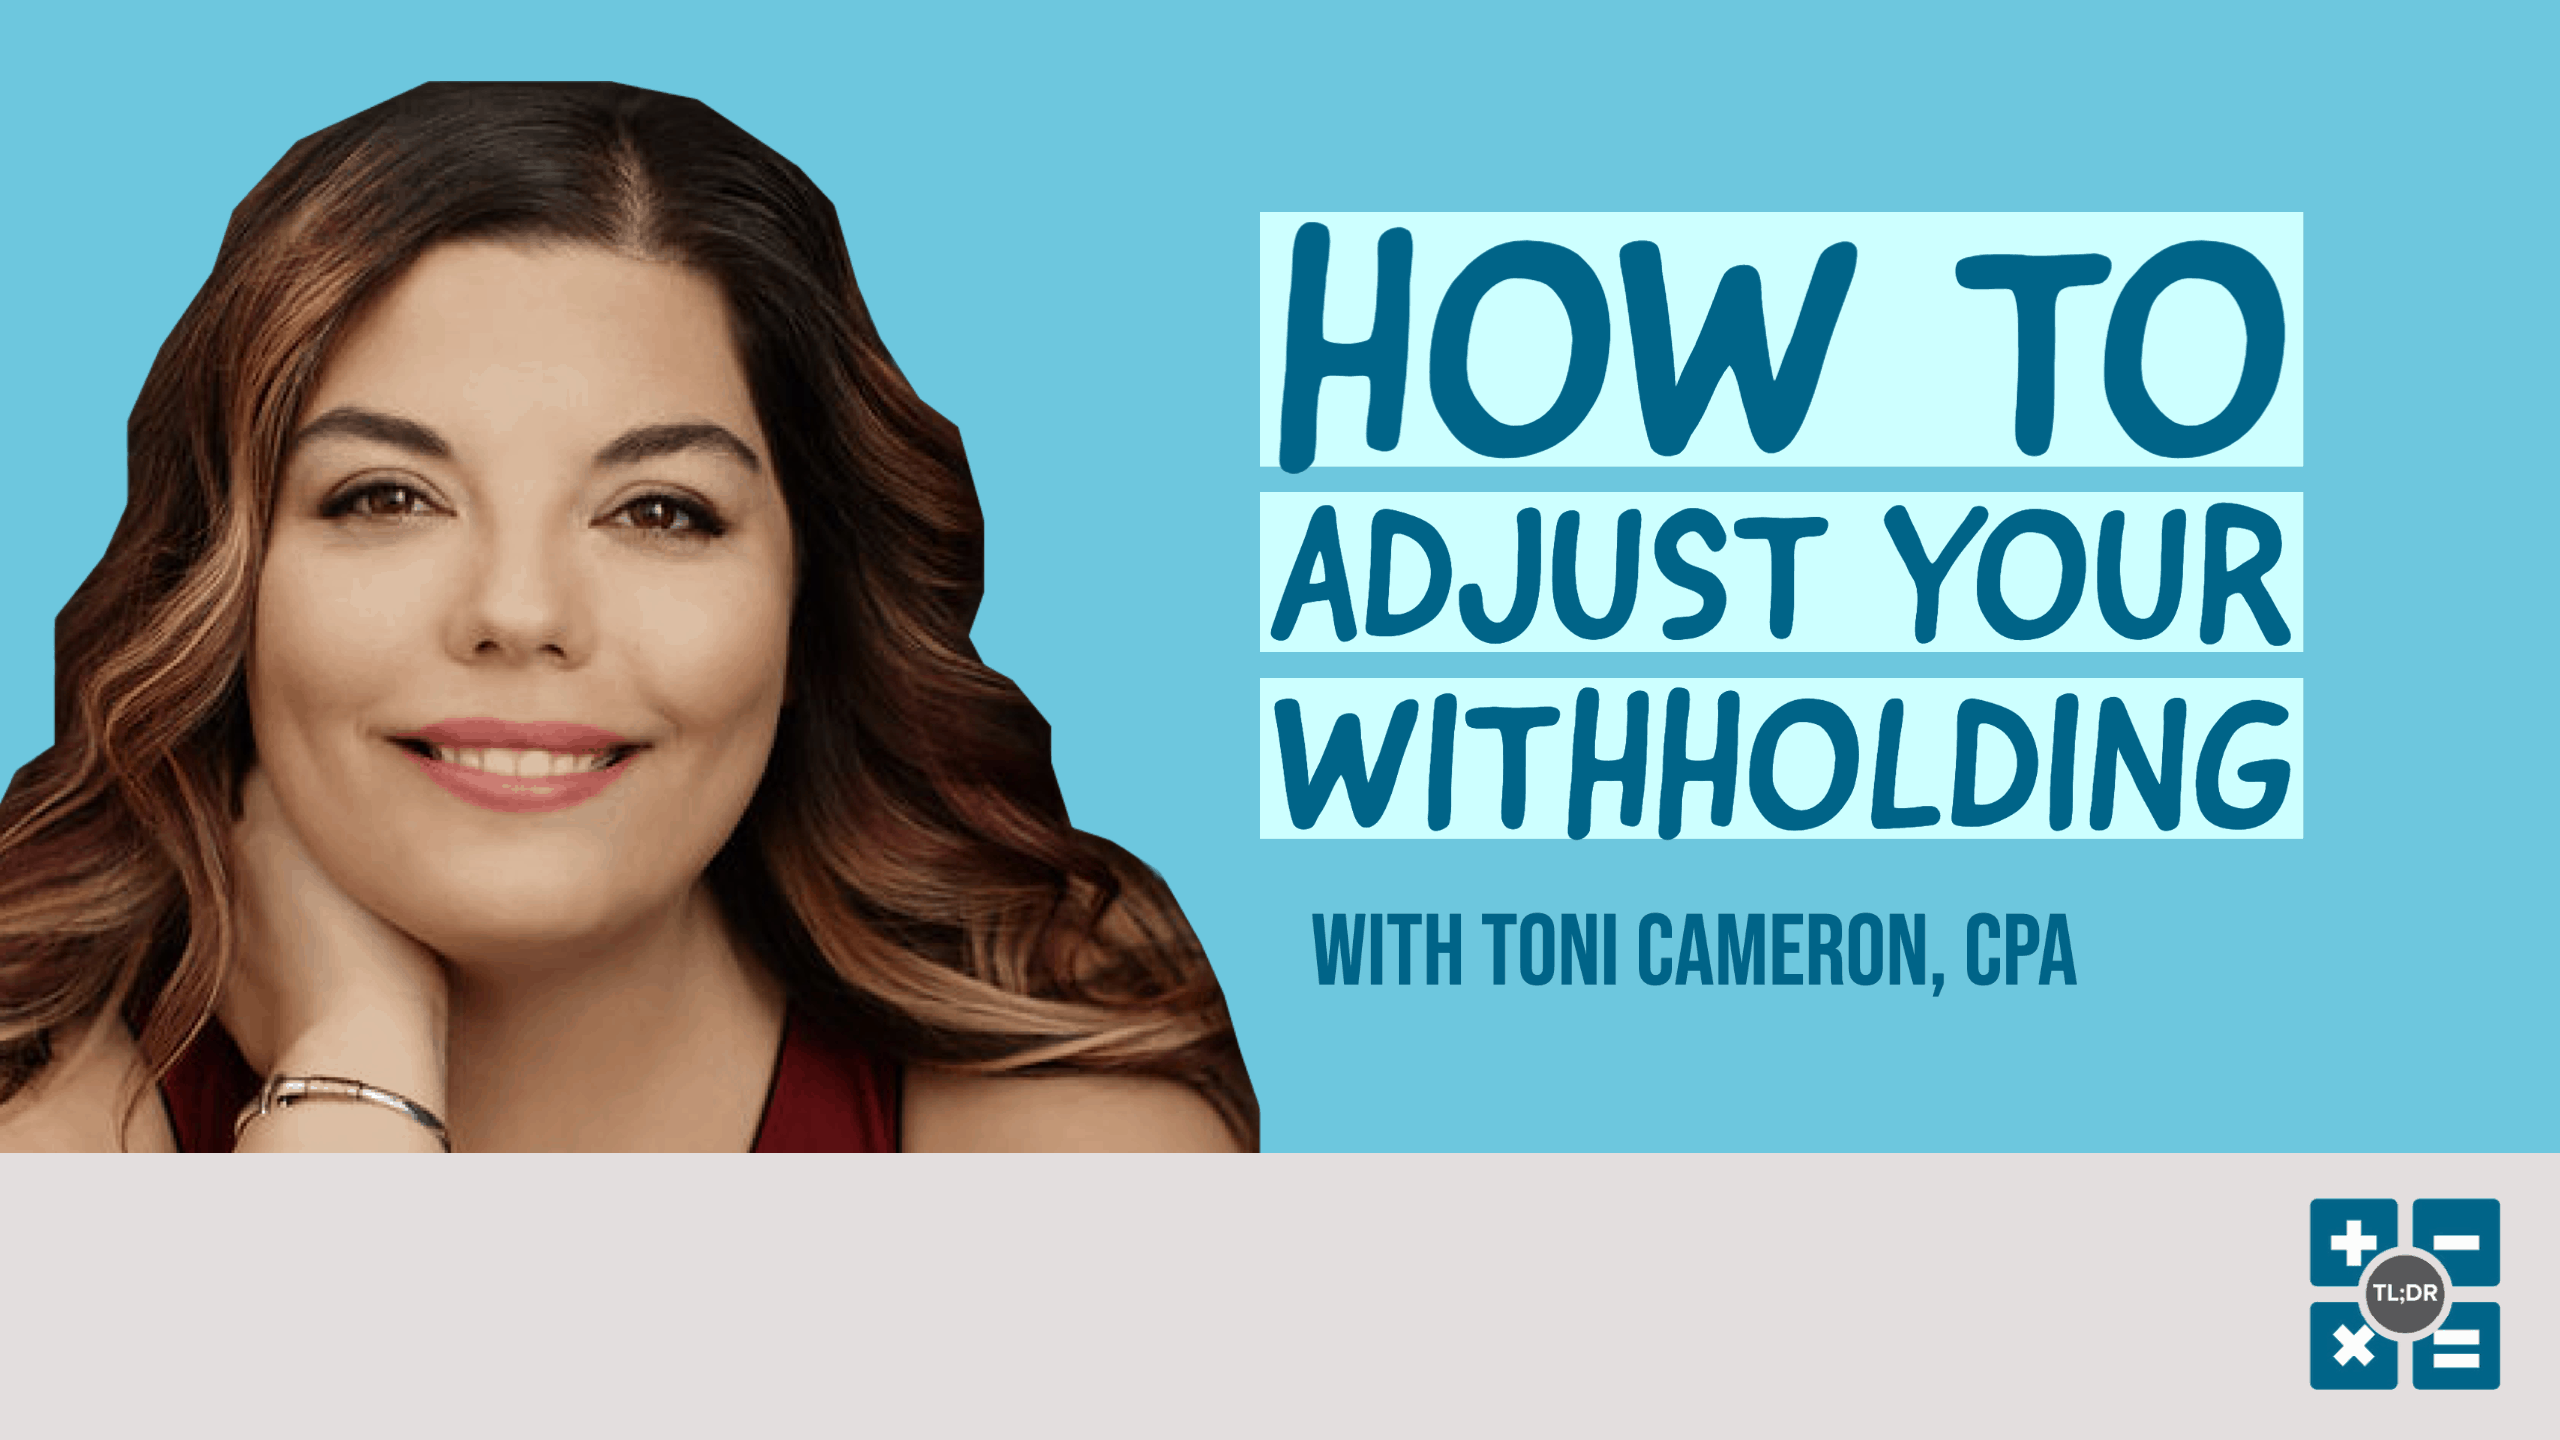 How to adjust withholding